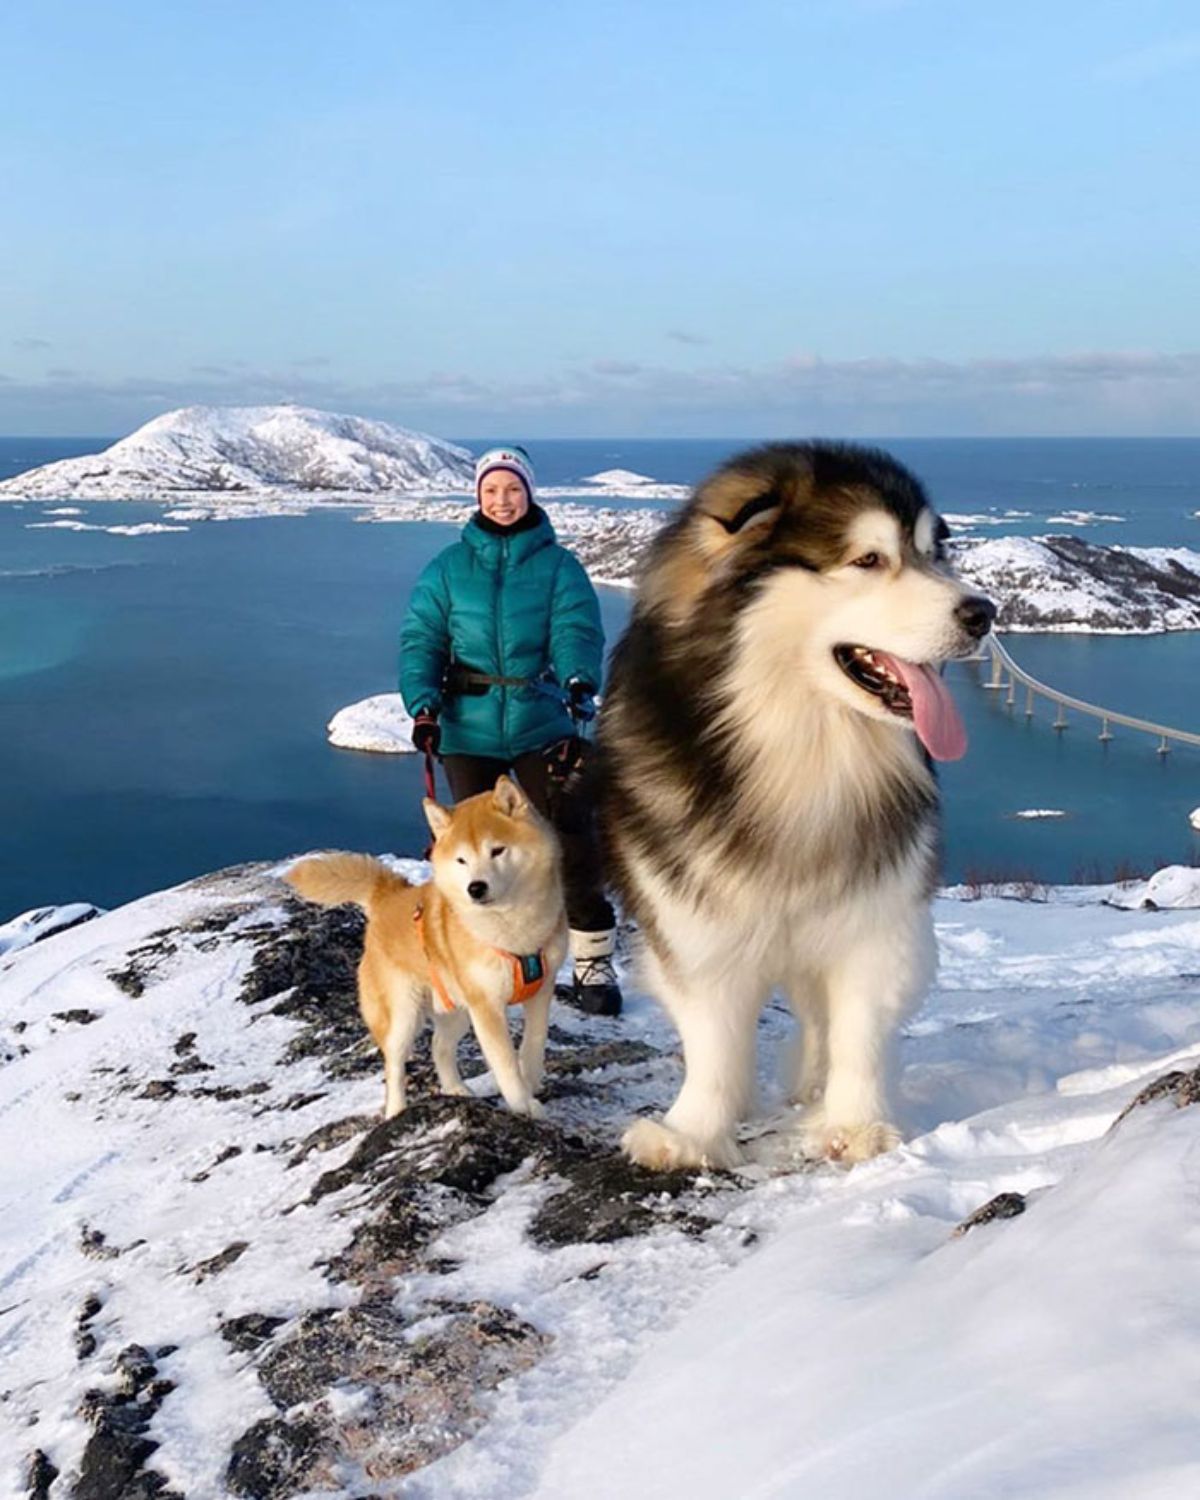 malamute standing on snow with a woman holding a brown and white akita behind the malamute